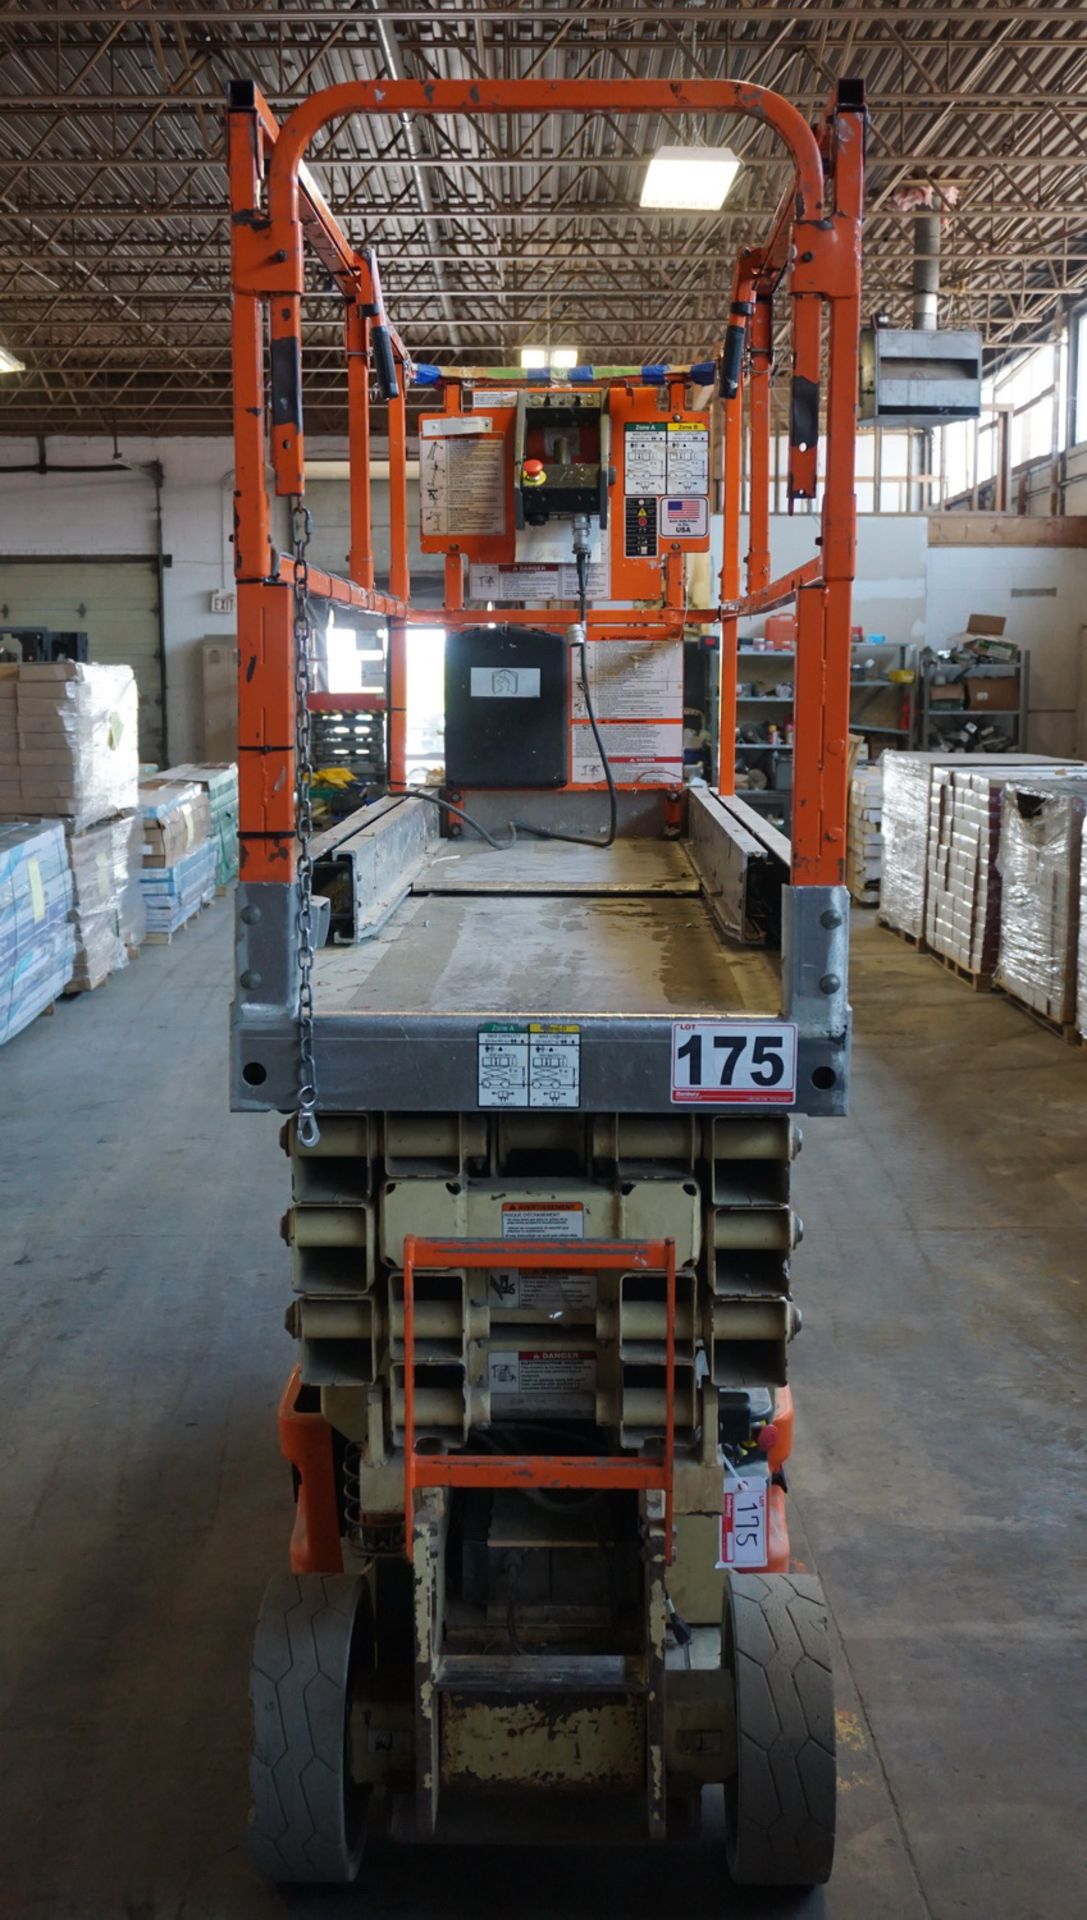 2007 JLG 2630ES ELECTRIC SCISSOR LIFT W/ 26"W X 25.4'H MAX HEIGHT, 500LBS CAP, W/ BUILT-IN CHARGER - Image 4 of 4